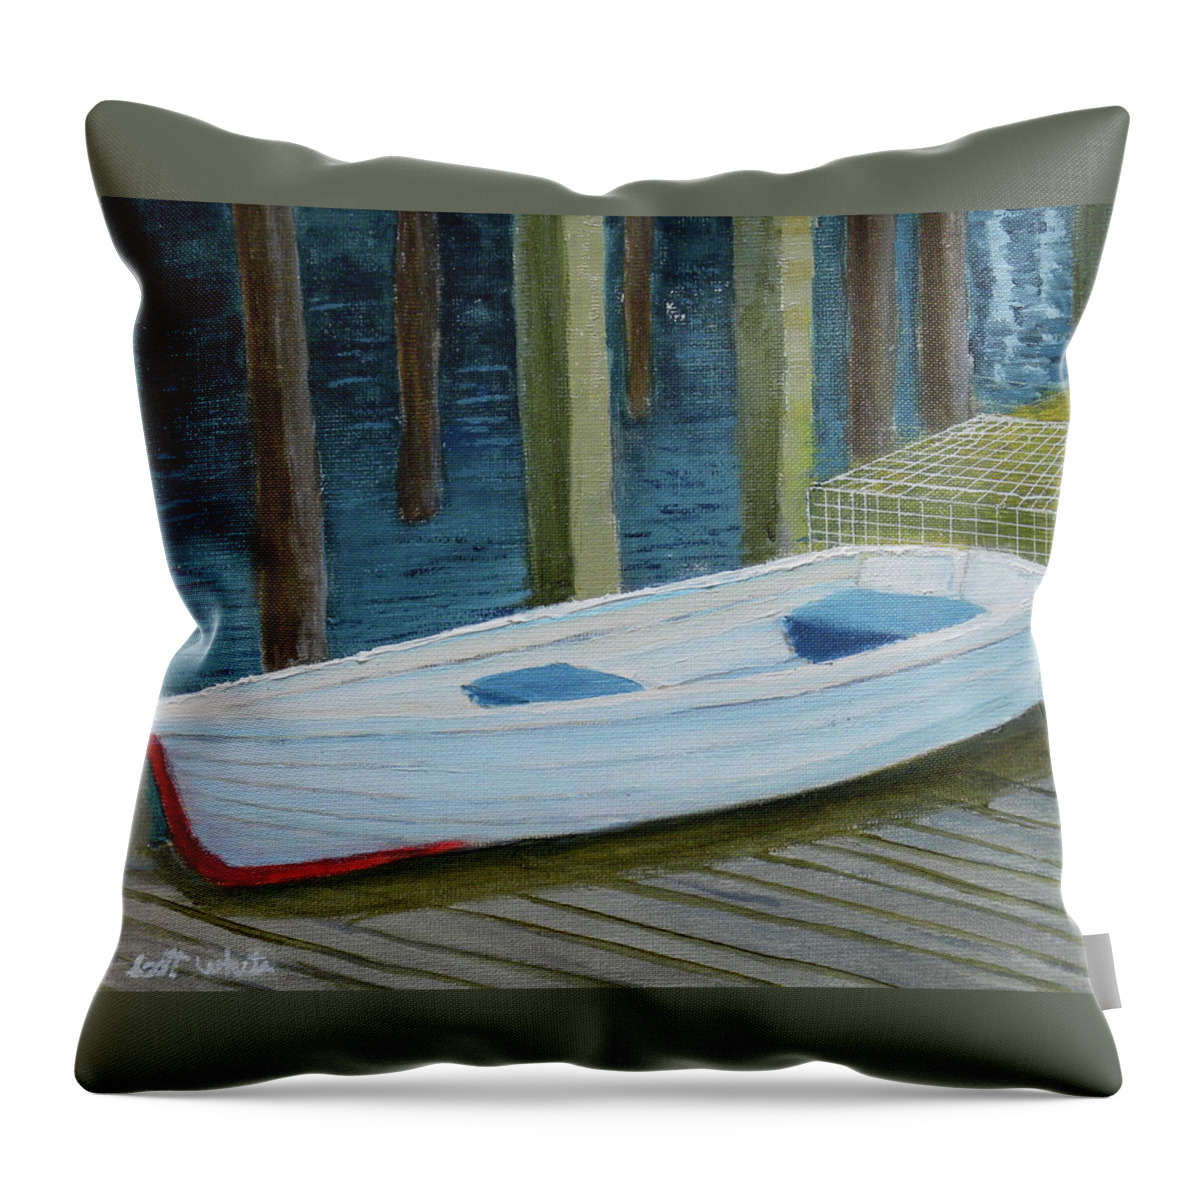 Landscape Seascape Boat Lobster Traps Dock Water Maine Throw Pillow featuring the painting Waiting For Work by Scott W White